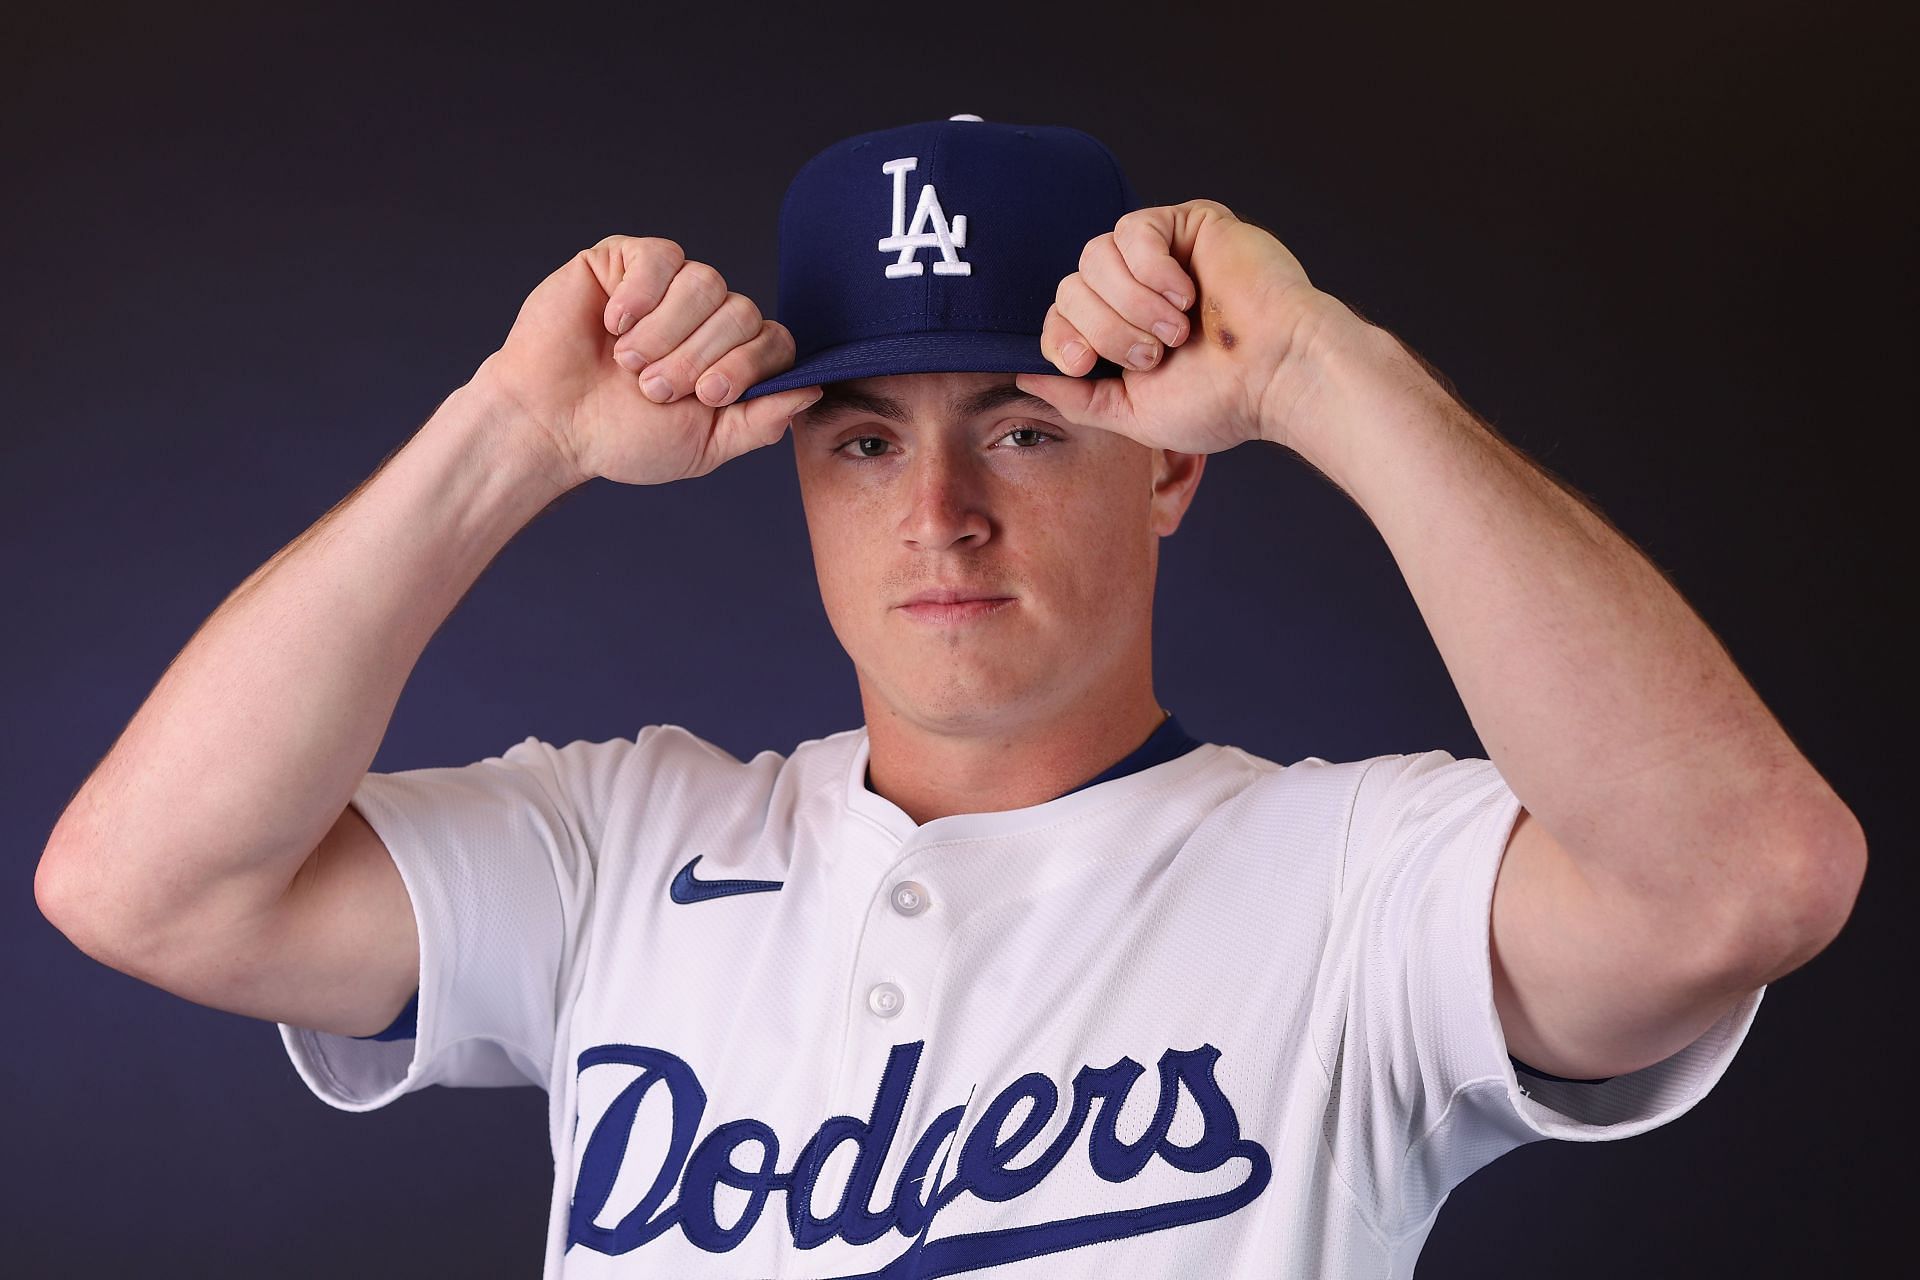 Prospects like Austin Gauthier proved to be valuable pipeline assets for the Los Angeles Dodgers.